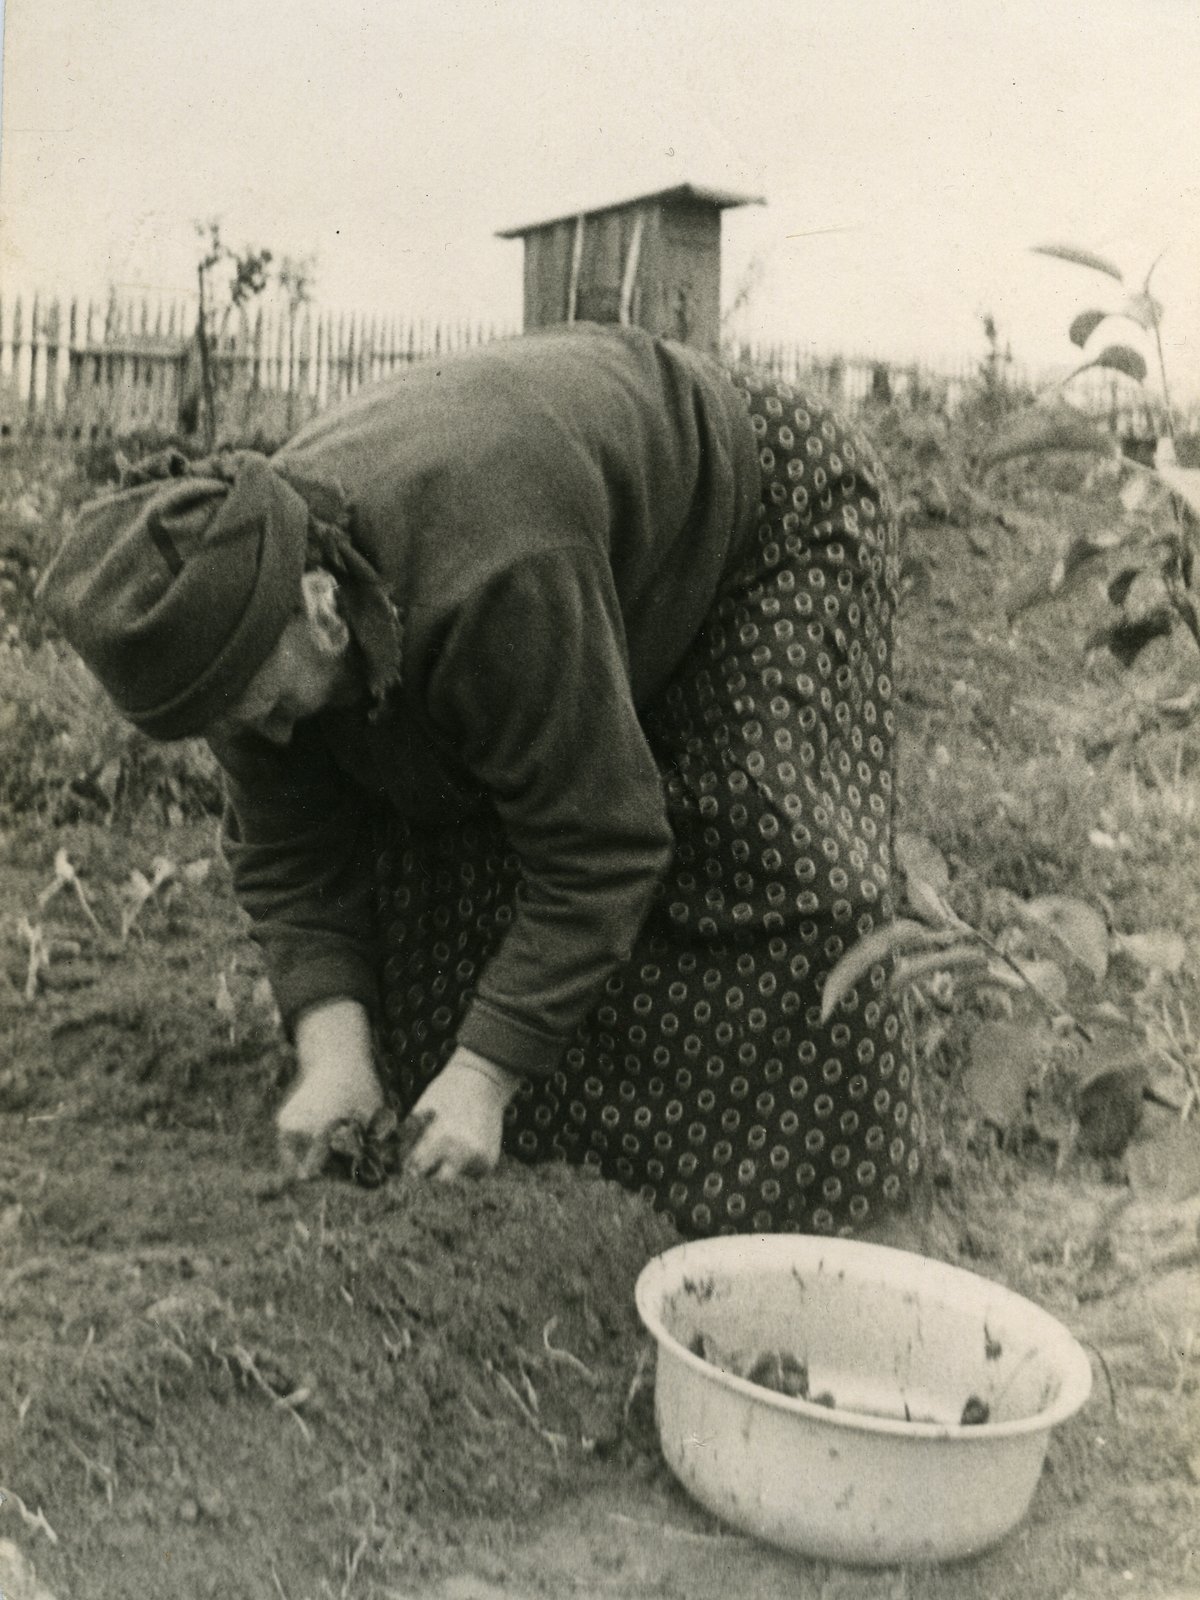 Woman in an allotment, year unknown&nbsp; From a found archiveCourtesy of Olga Grotova